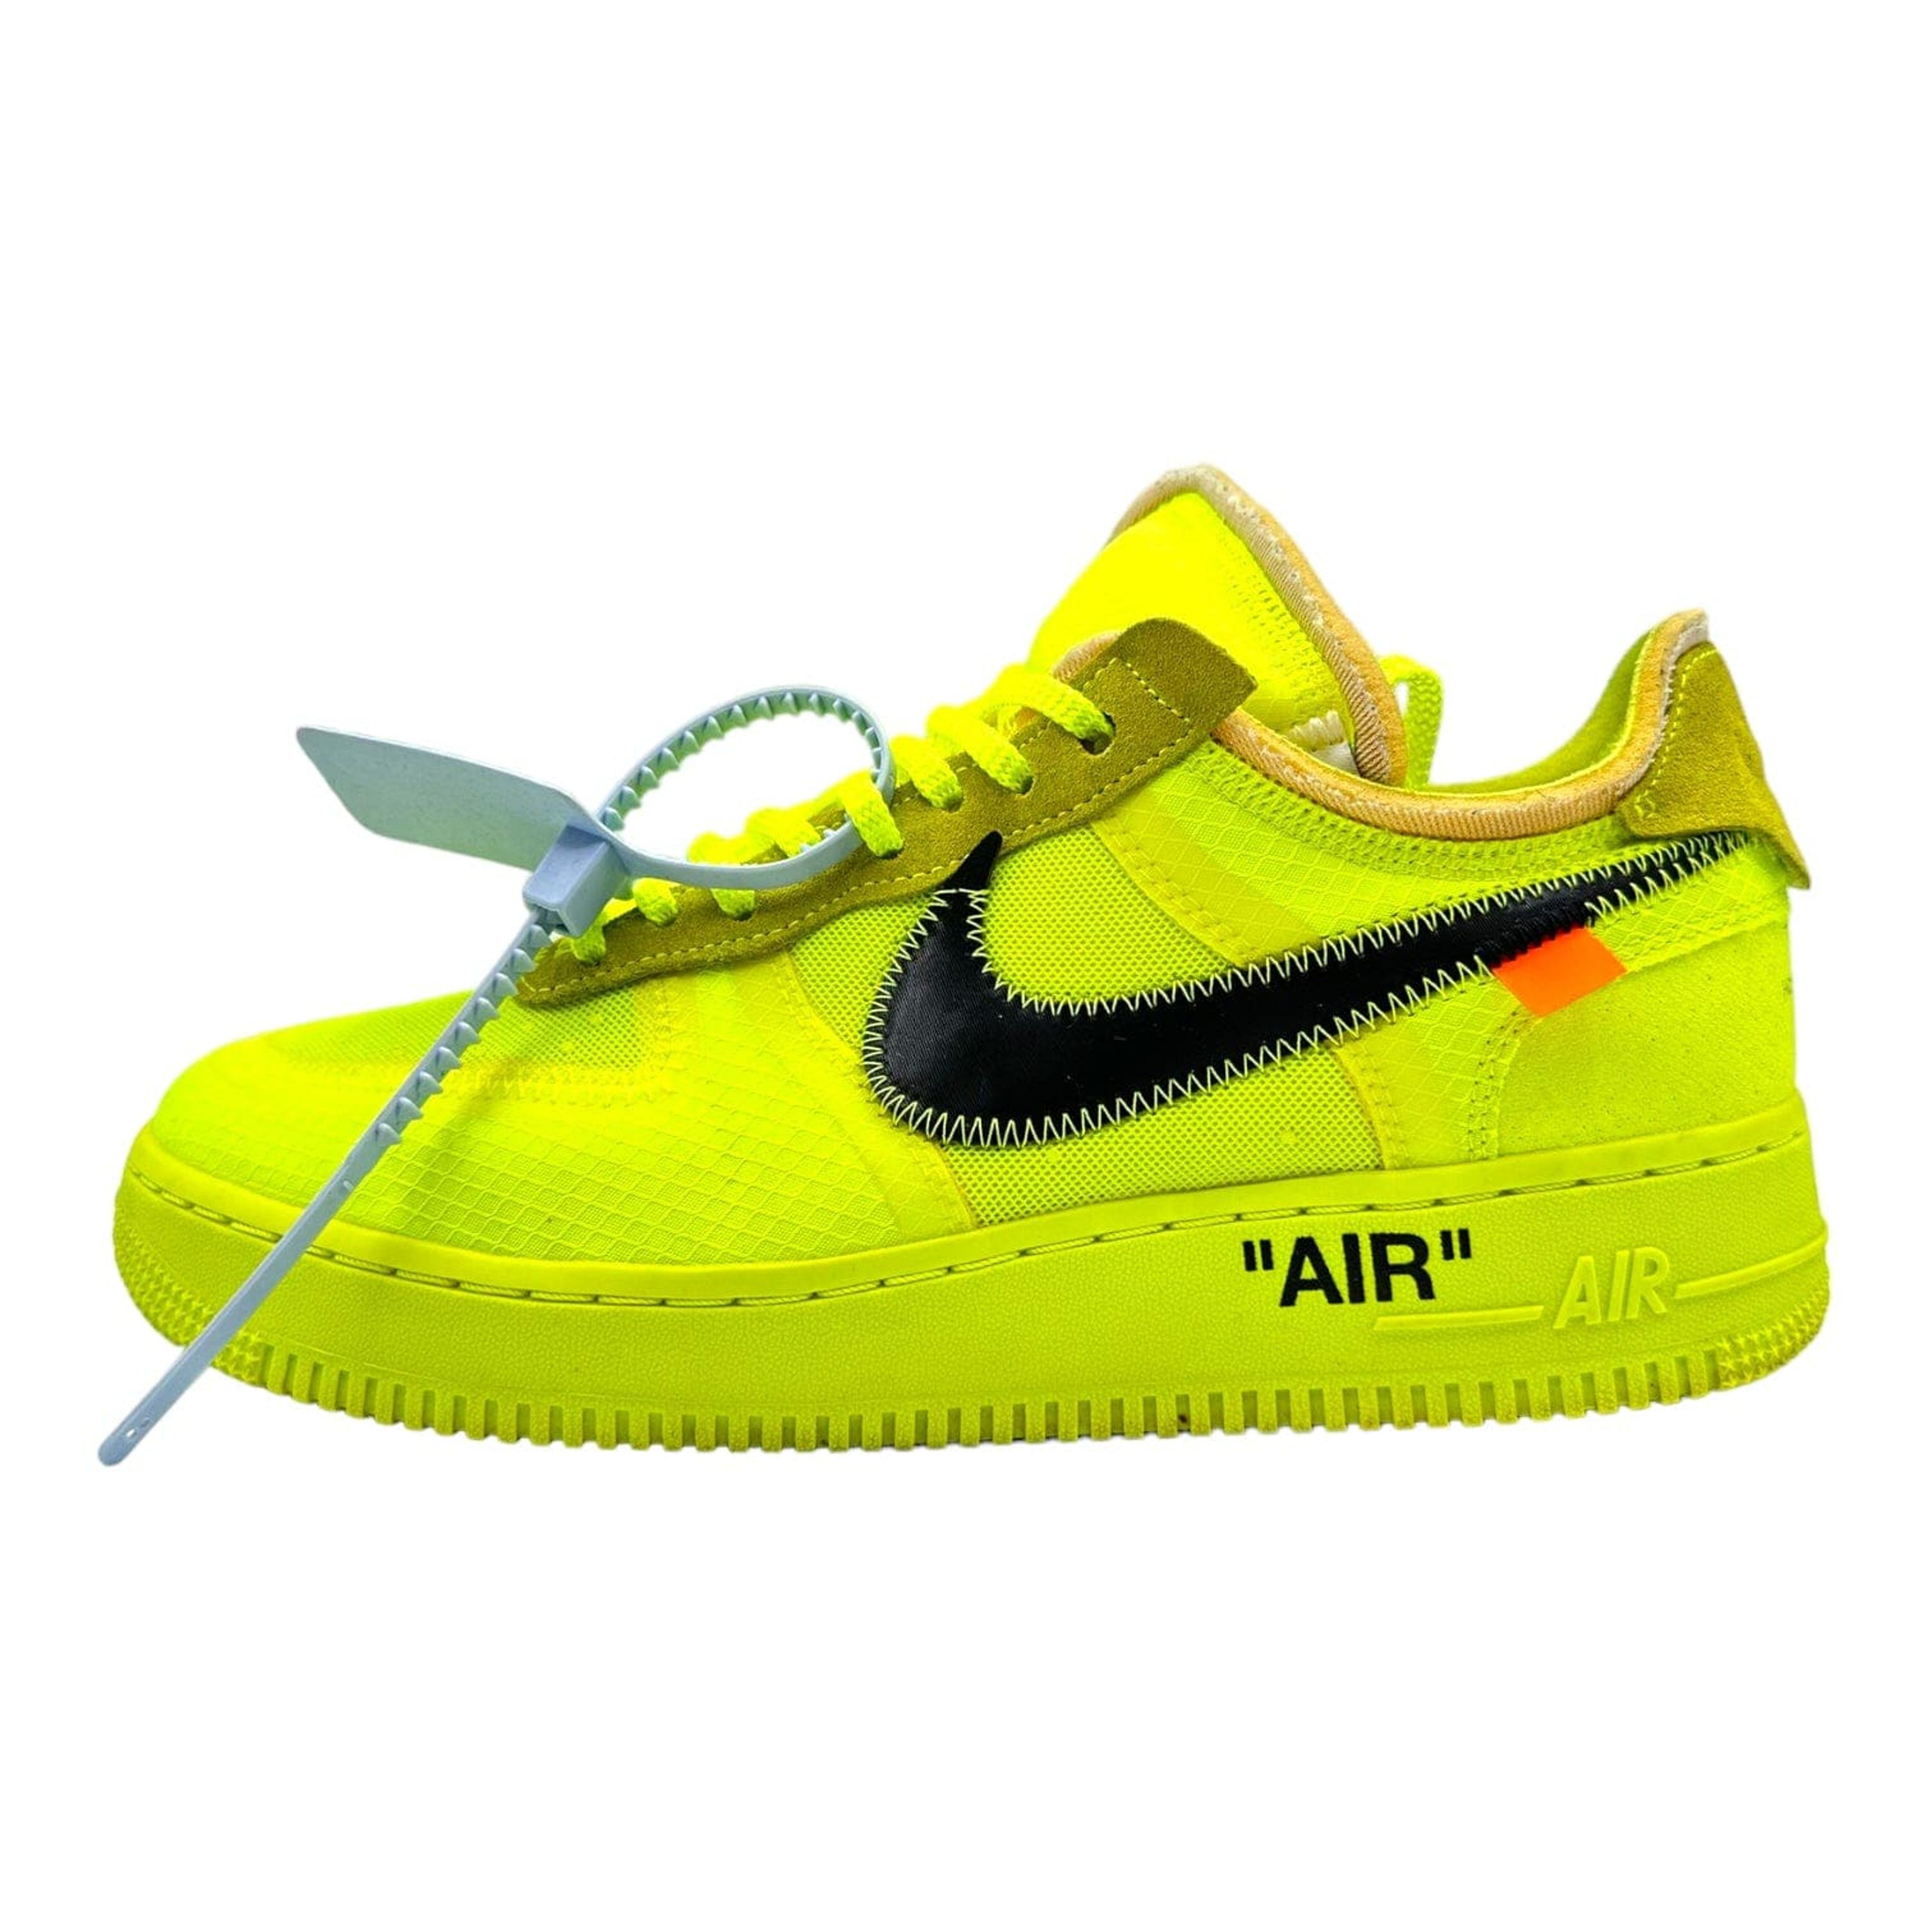 Alternate View 1 of Nike Air Force 1 Low Off-White Volt Pre-Owned